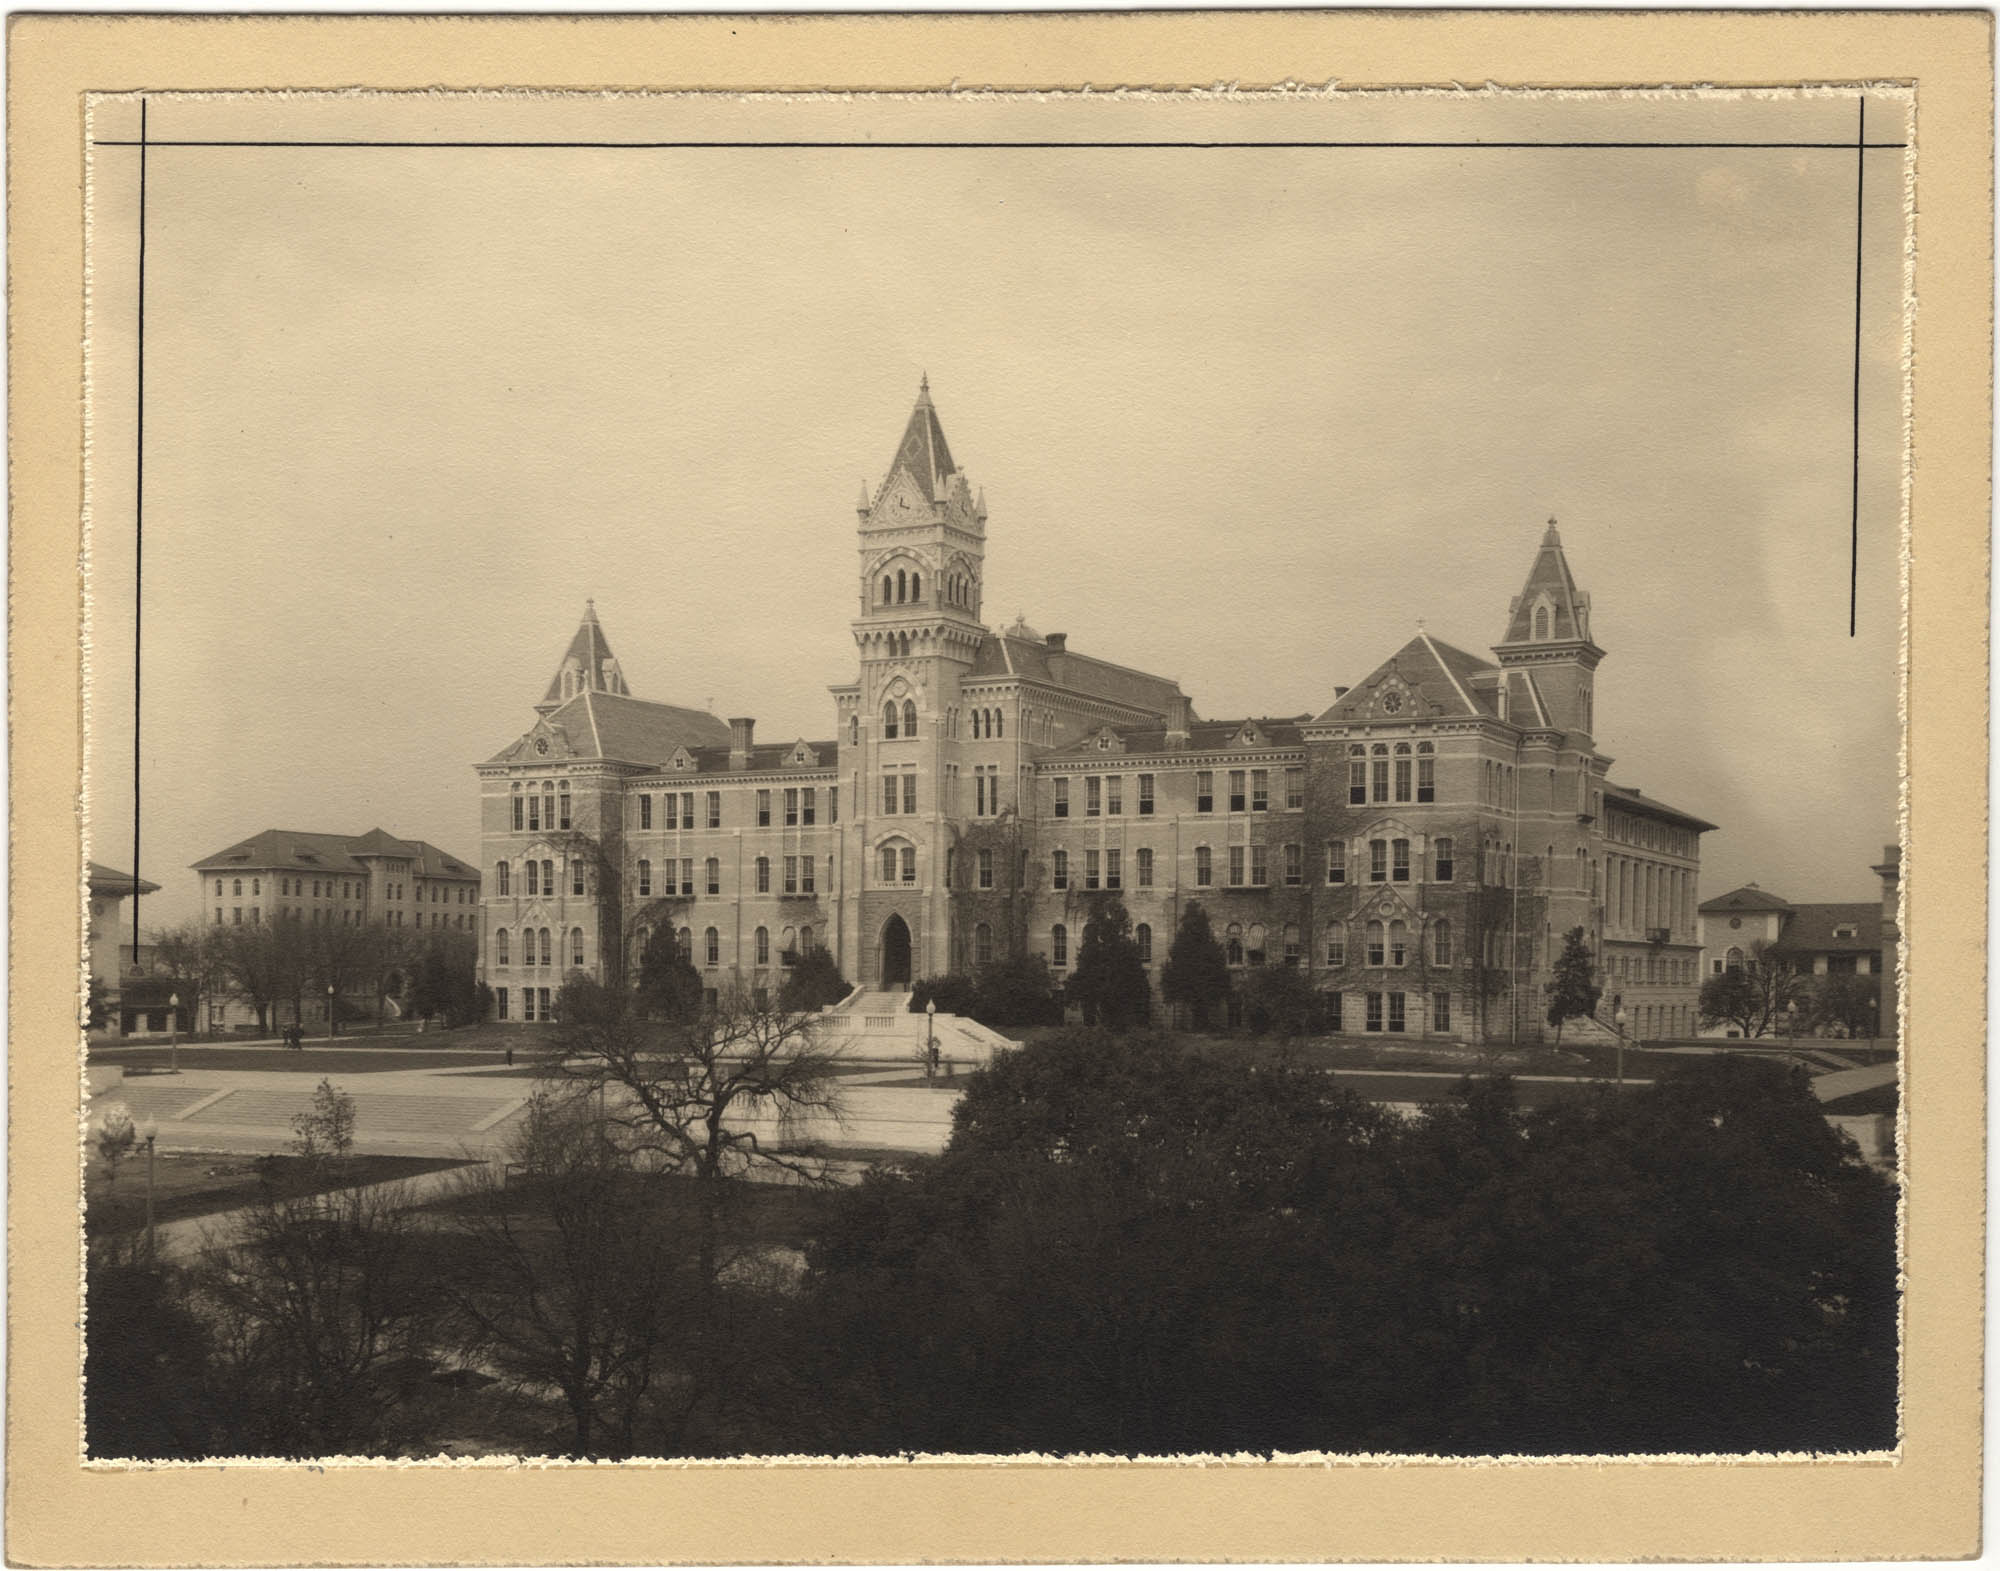 The image is a sepia photograph of the exterior of the old main building at the University of Texas.  The large building has many windows across the front that suggest four main floors.  Coming from the bottom center of the building is an elegant set of steps leading to the main door.  A tall clock tower is set at the top of the building, above the main entrance. From the Frederick Ernst Ruffini collection.